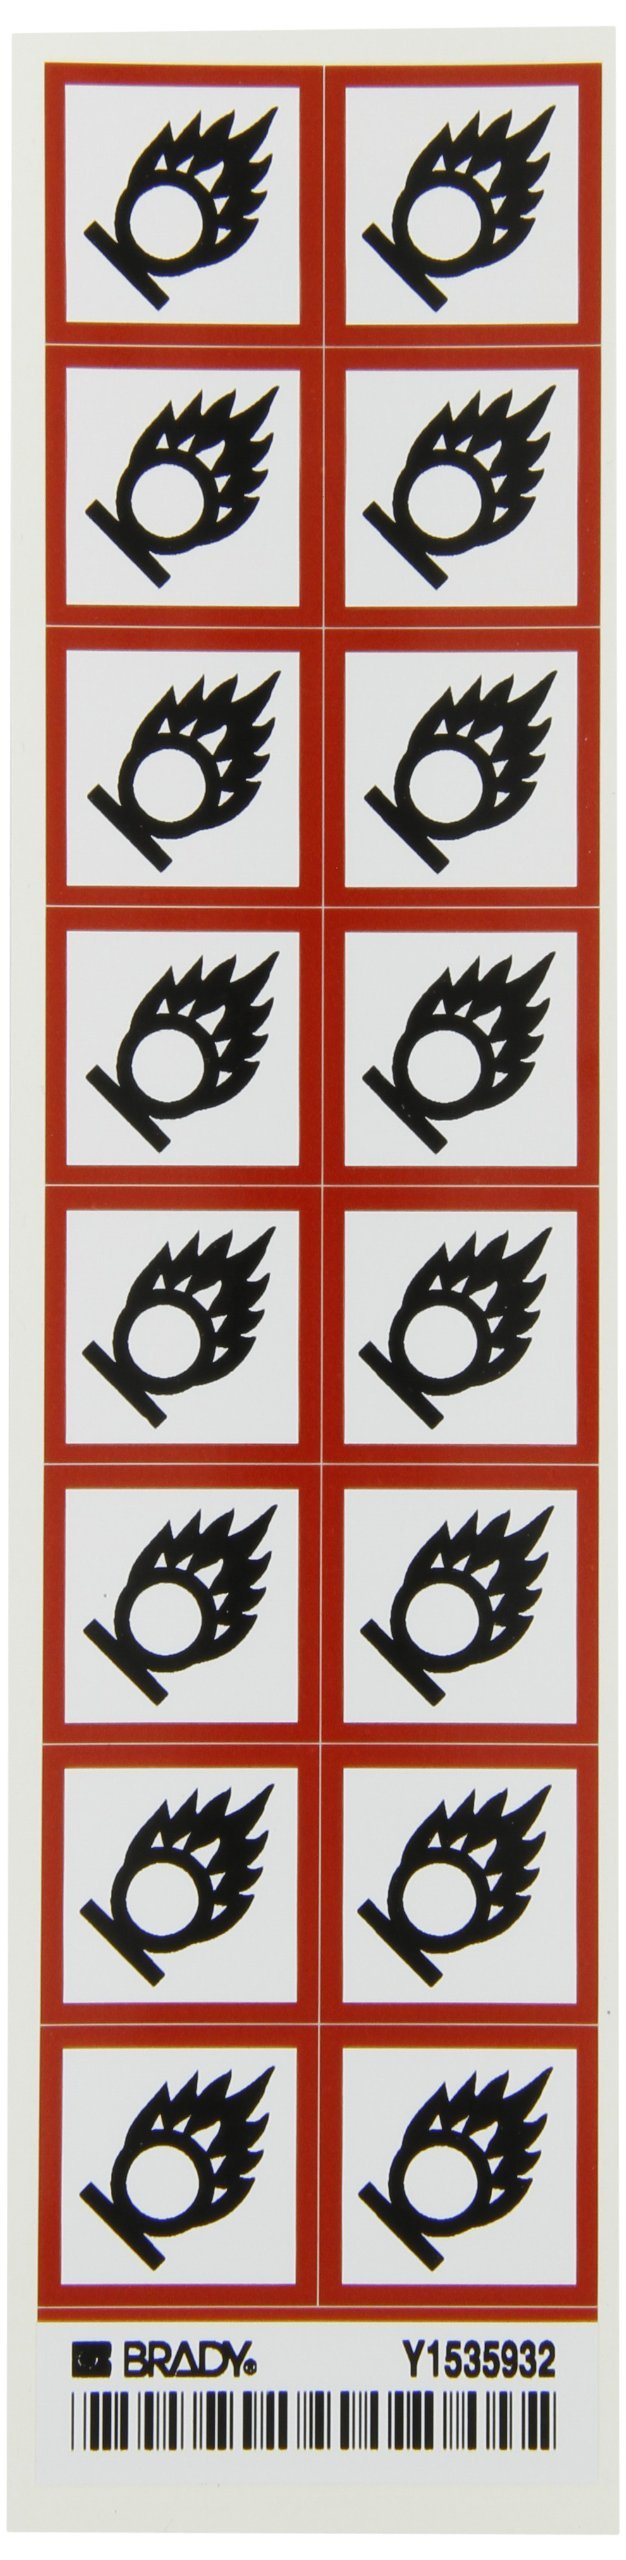 Brady 118828 Vinyl GHS Oxidizing Picto Labels , Black/Red On White, 1" Height x 1" Width, Pictogram "Oxidizing" (16 Labels, 1 Card per Package)